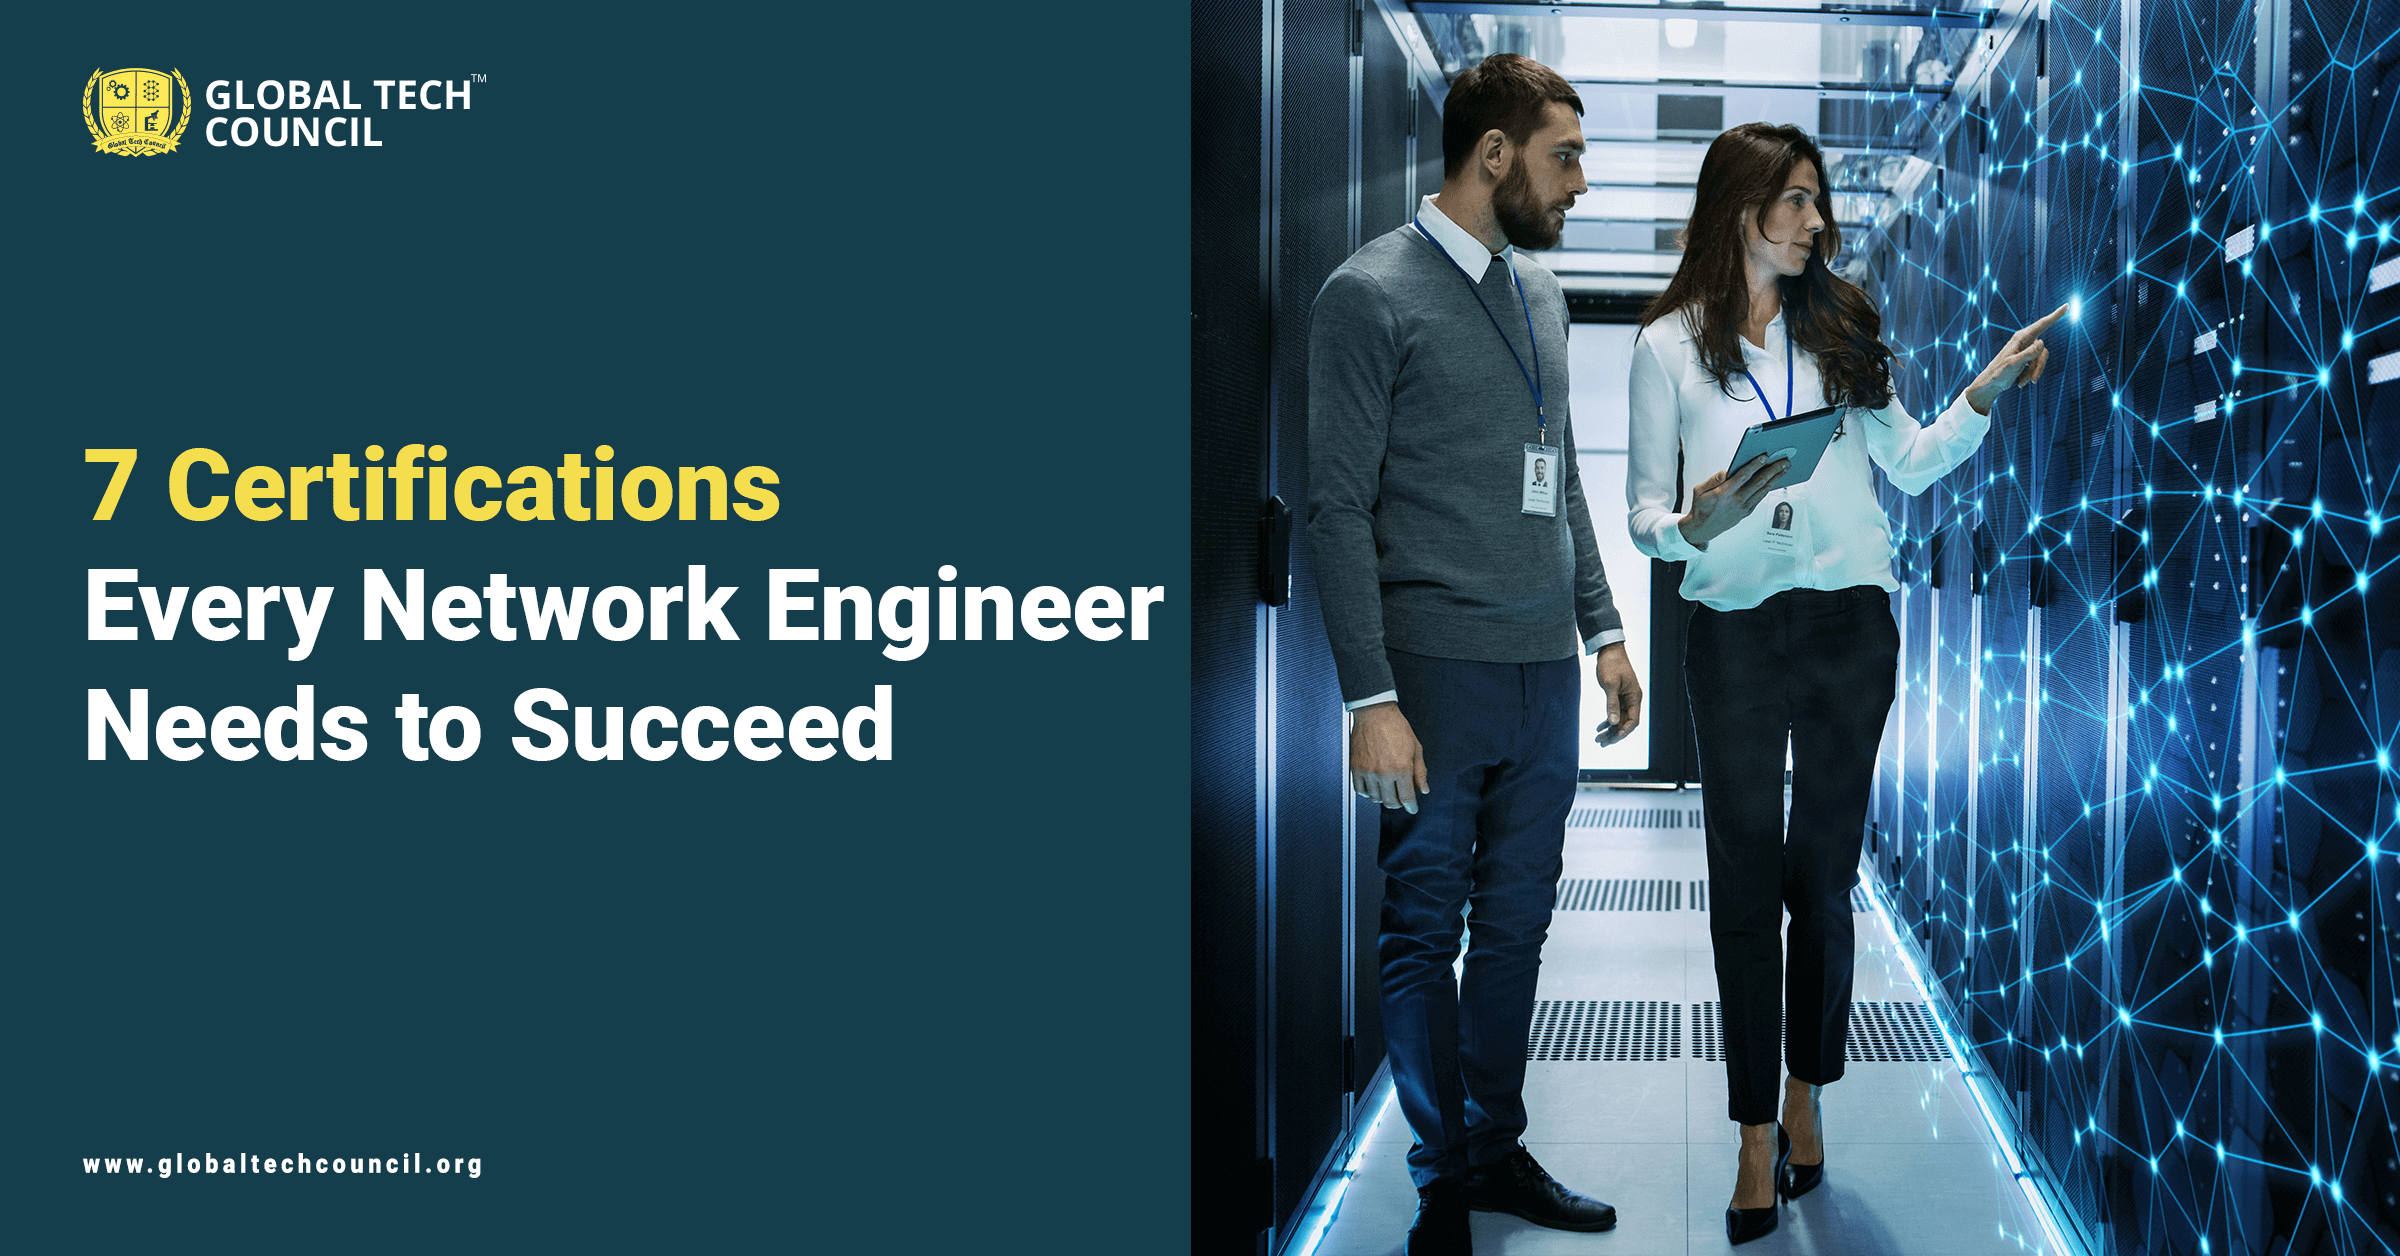 7 Certifications Every Network Engineer Needs to Succeed